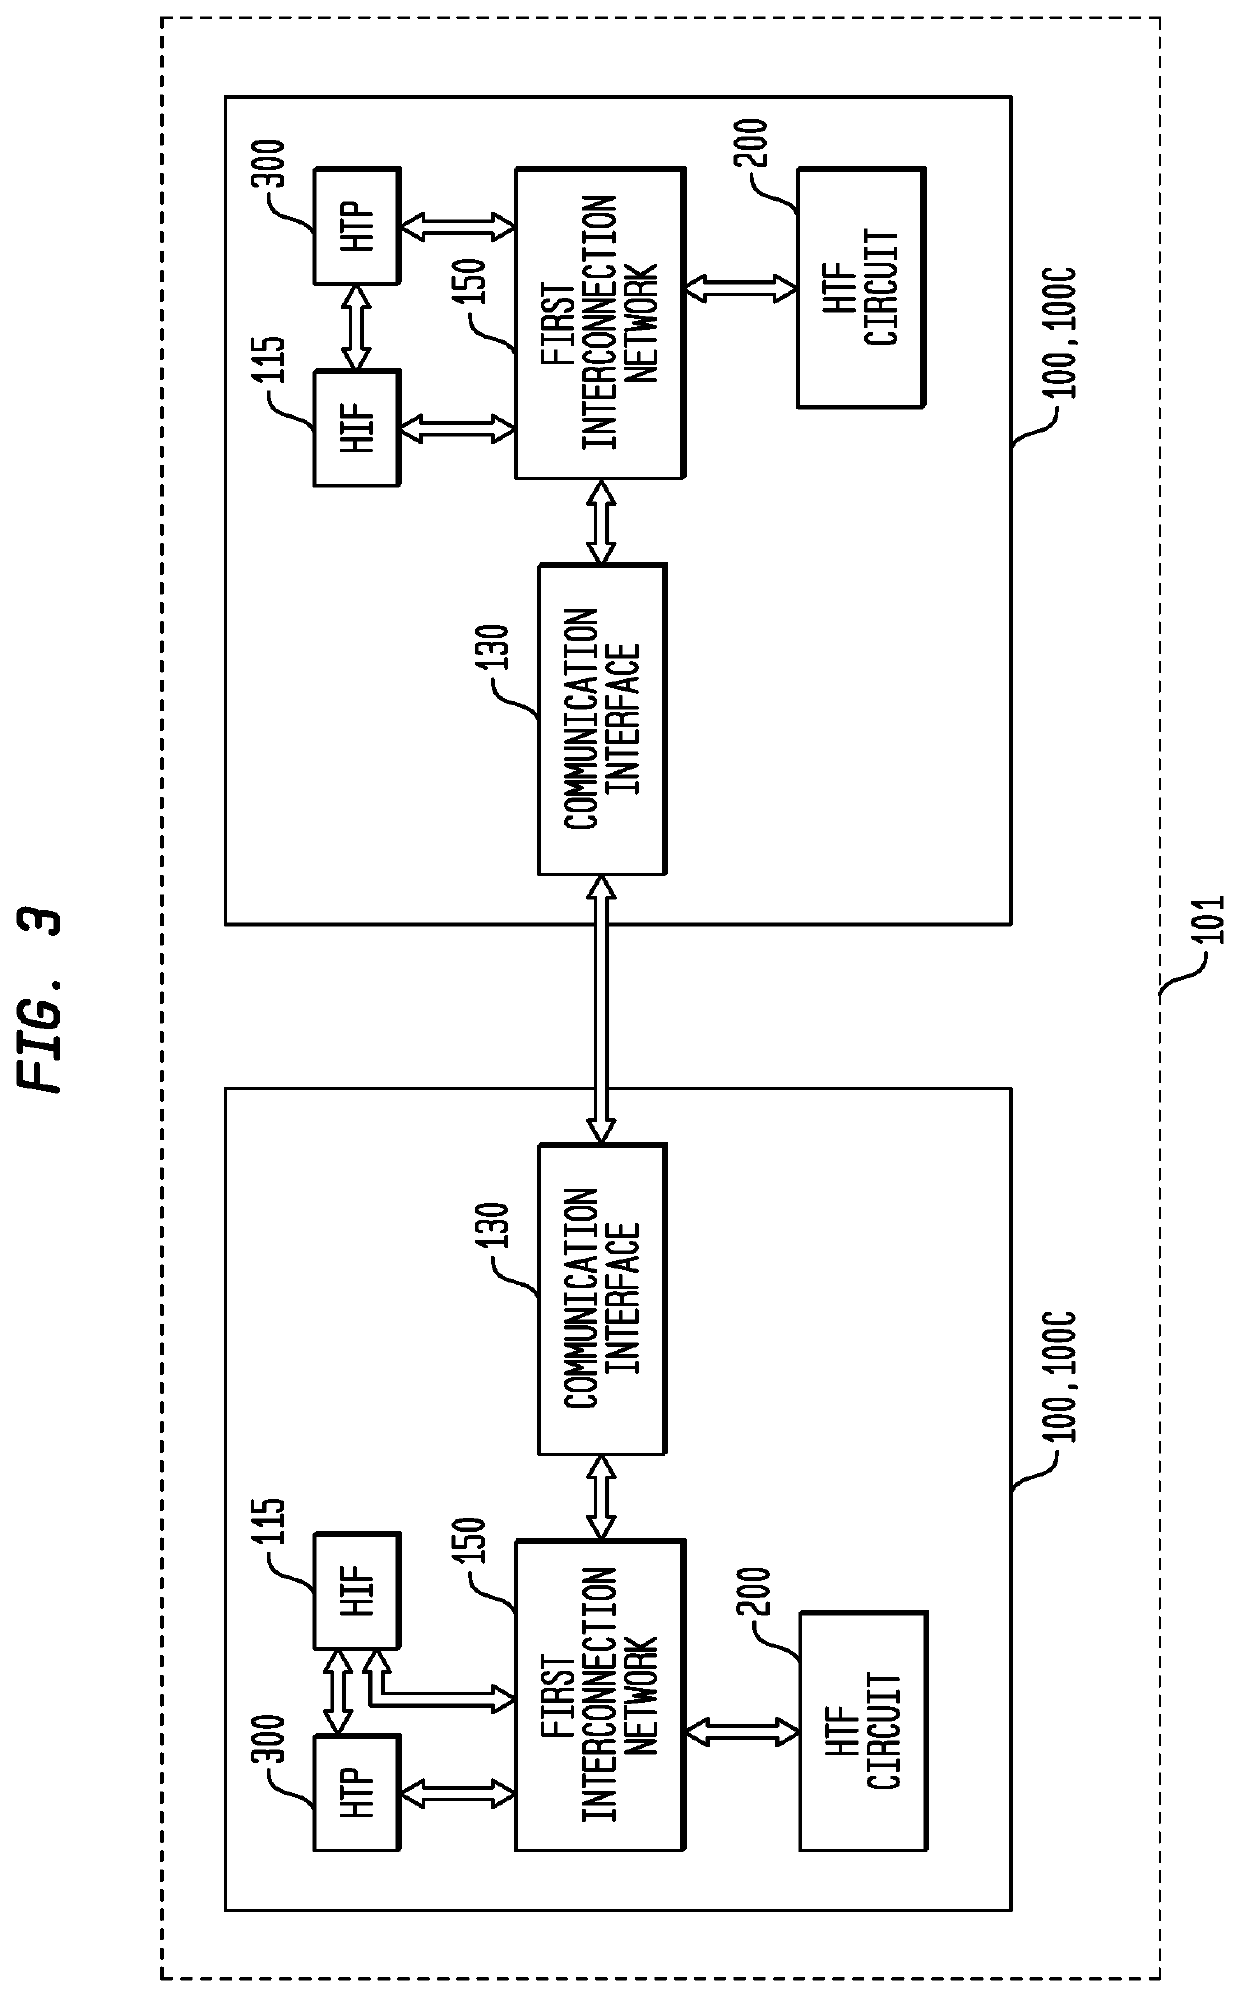 Event Messaging in a System Having a Self-Scheduling Processor and a Hybrid Threading Fabric